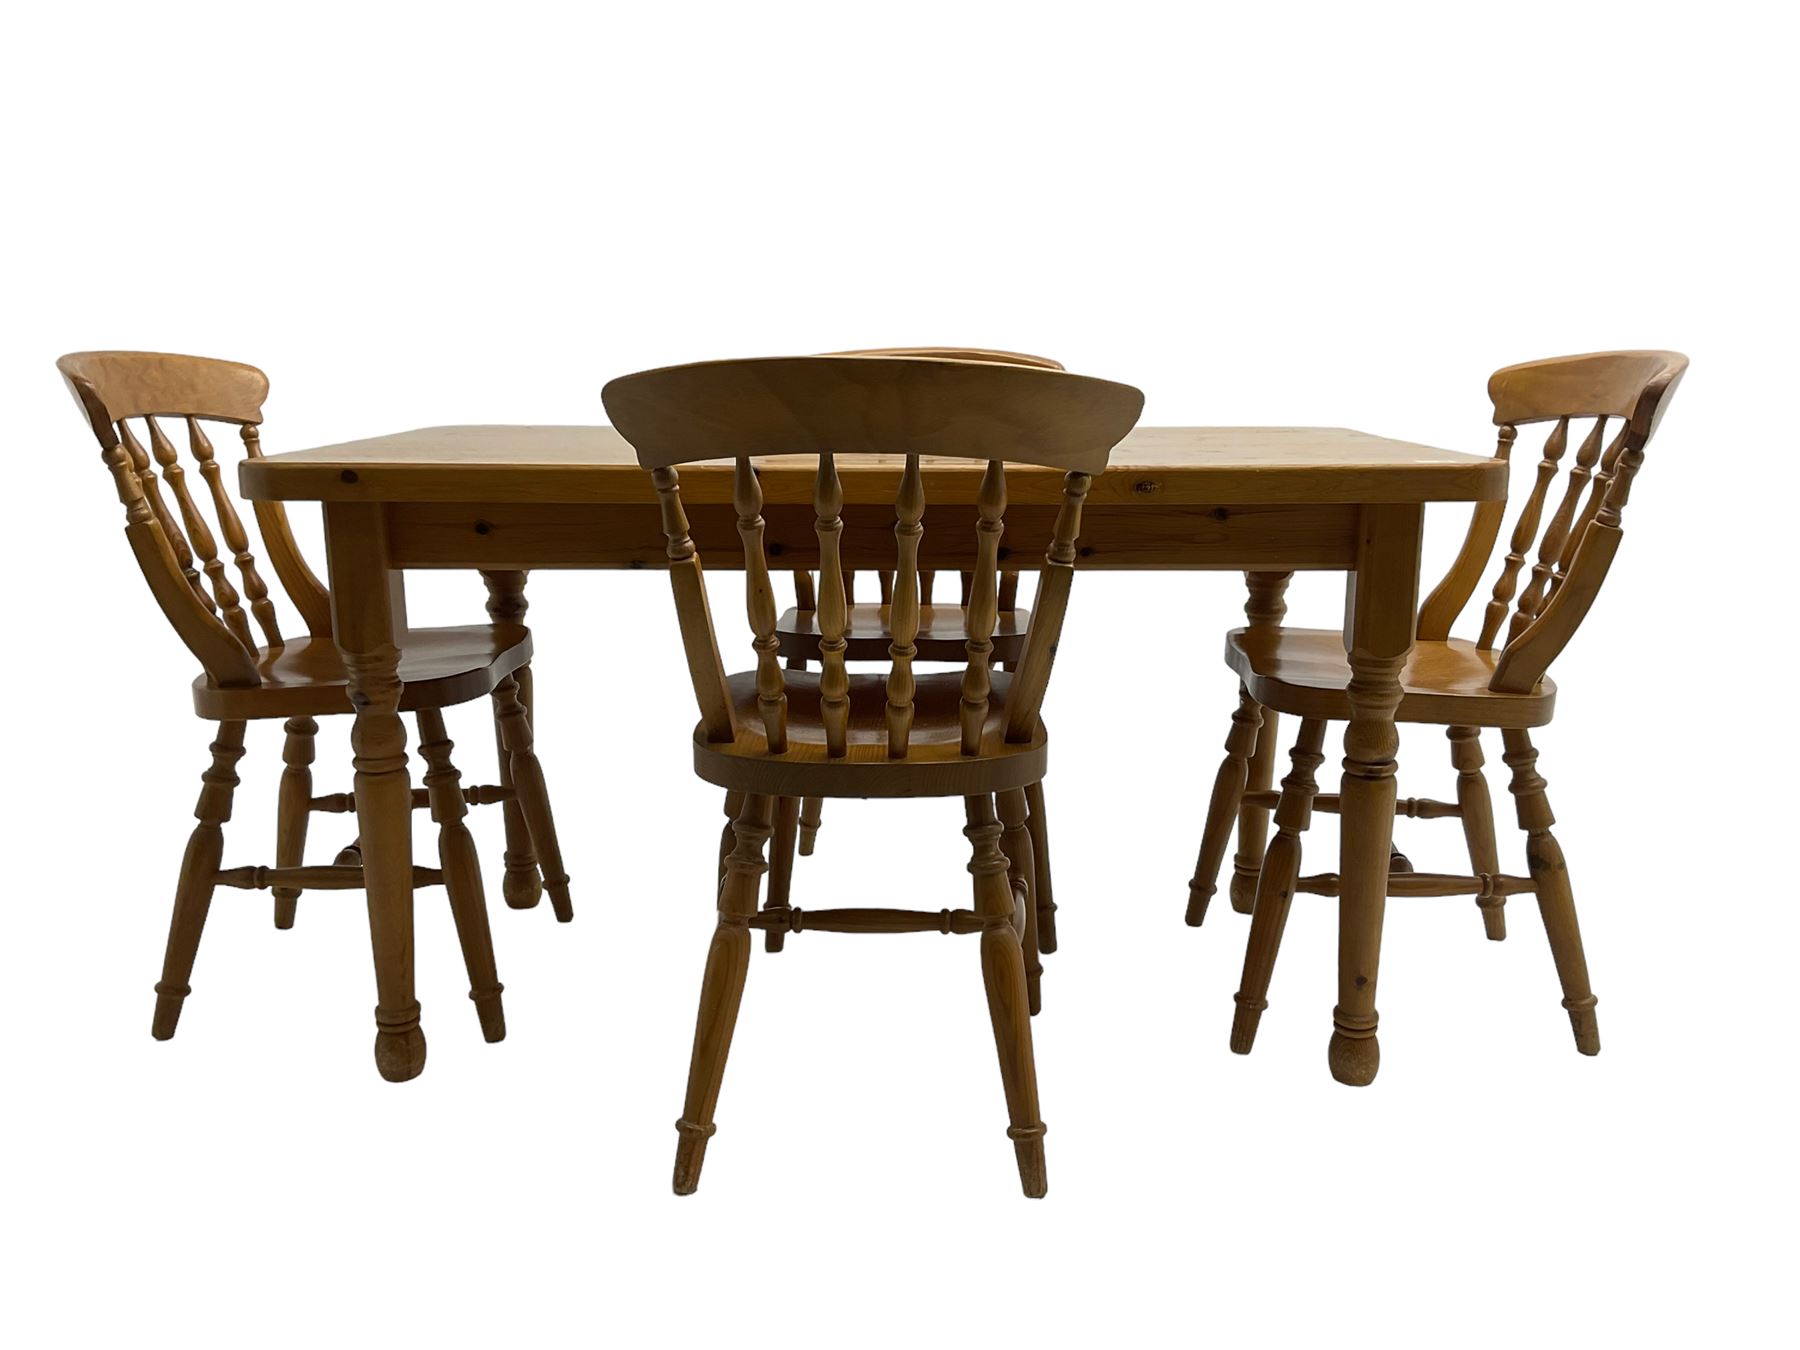 Traditional pine dining table